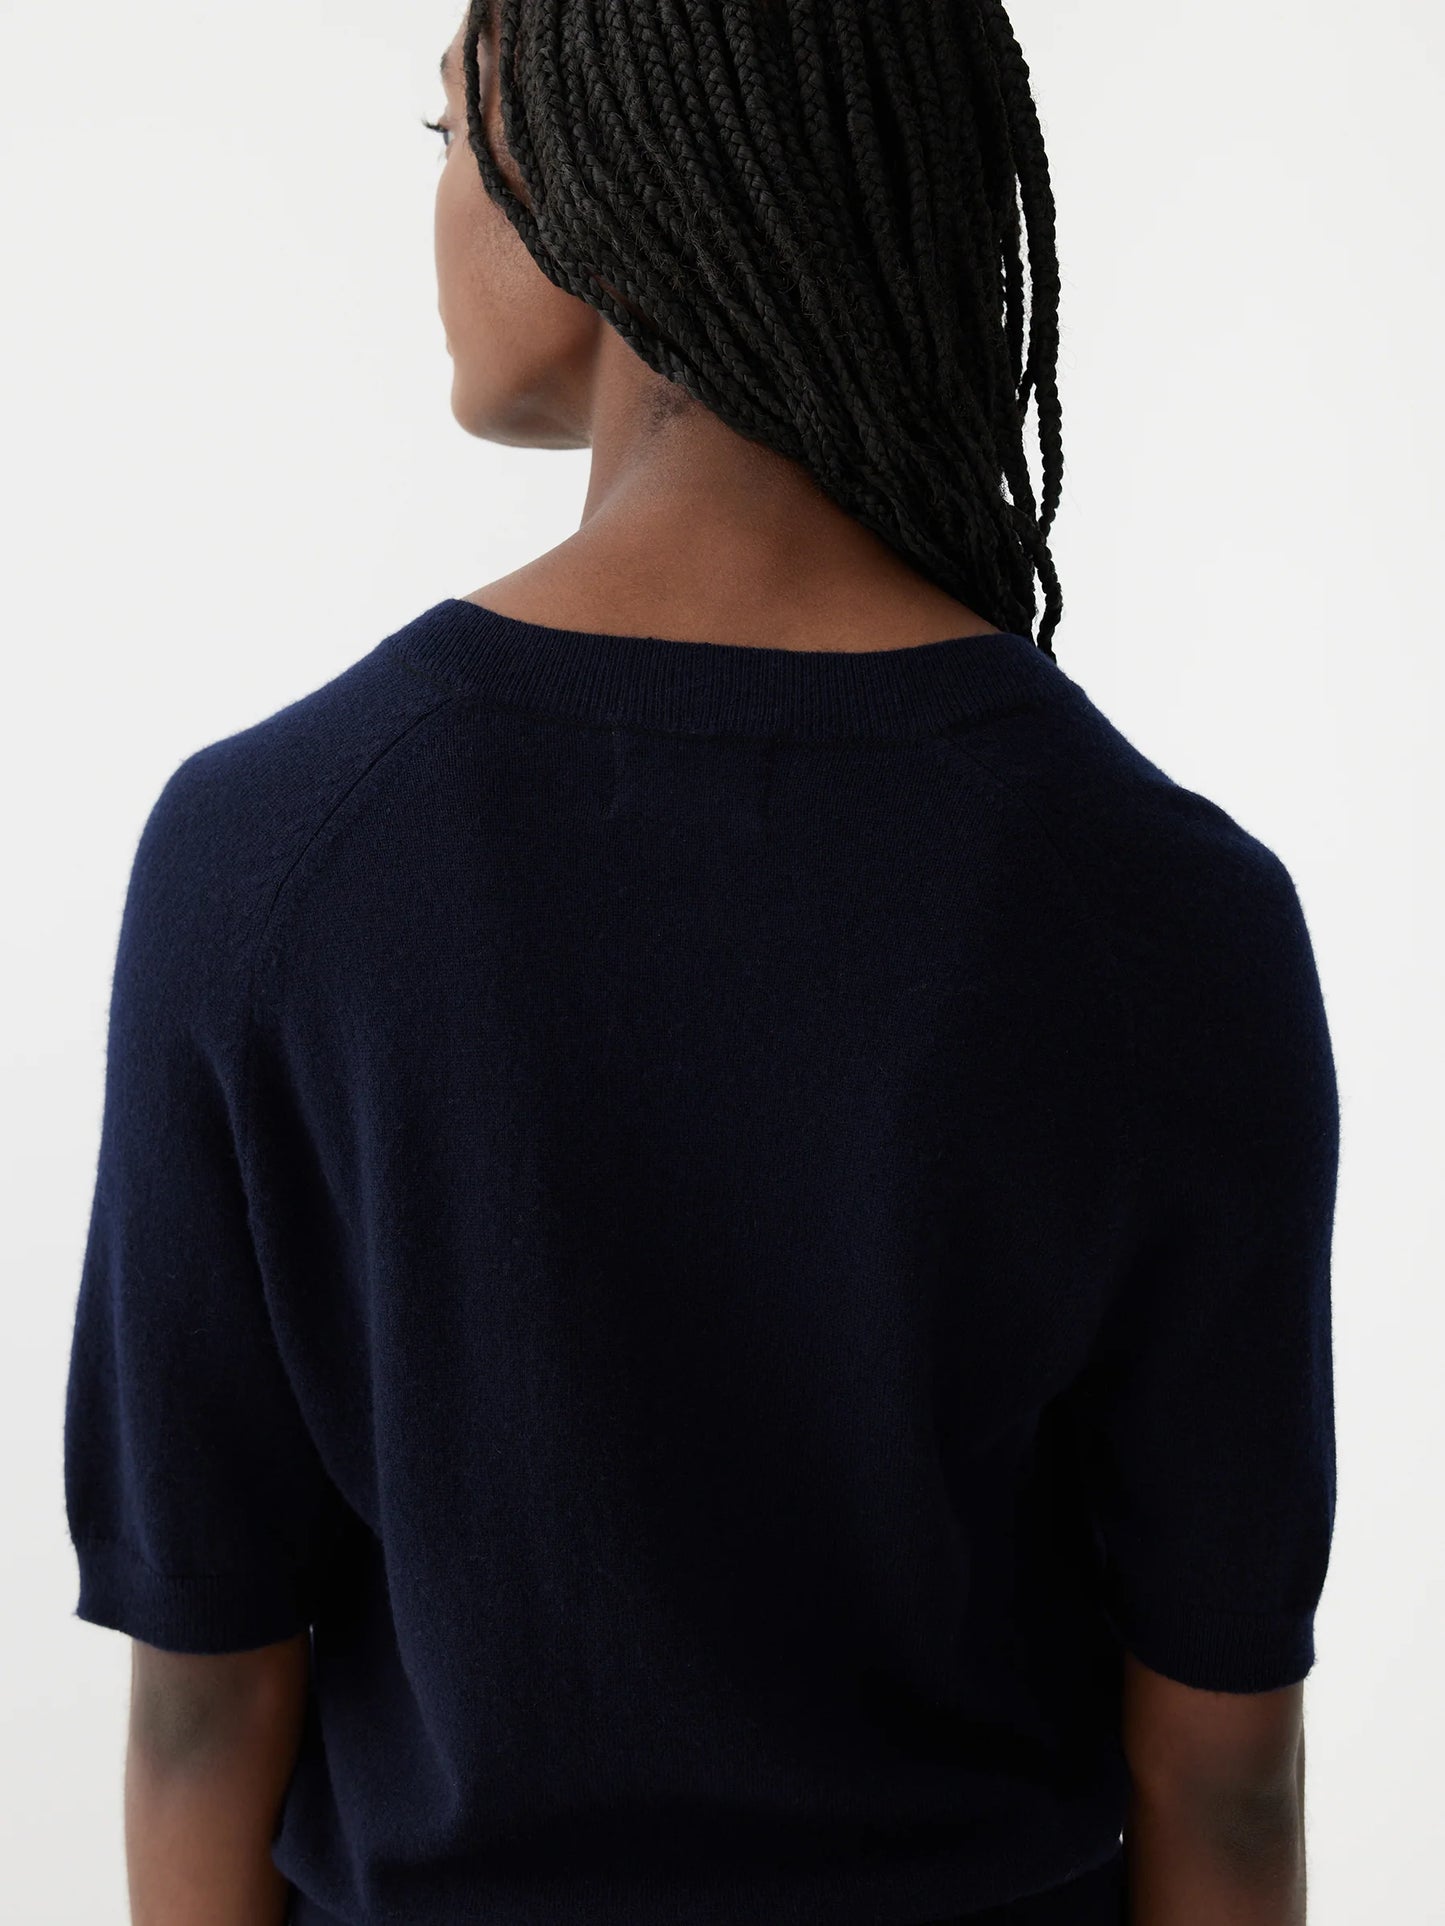 Wool Cashmere T-shirt Knit by Bassike